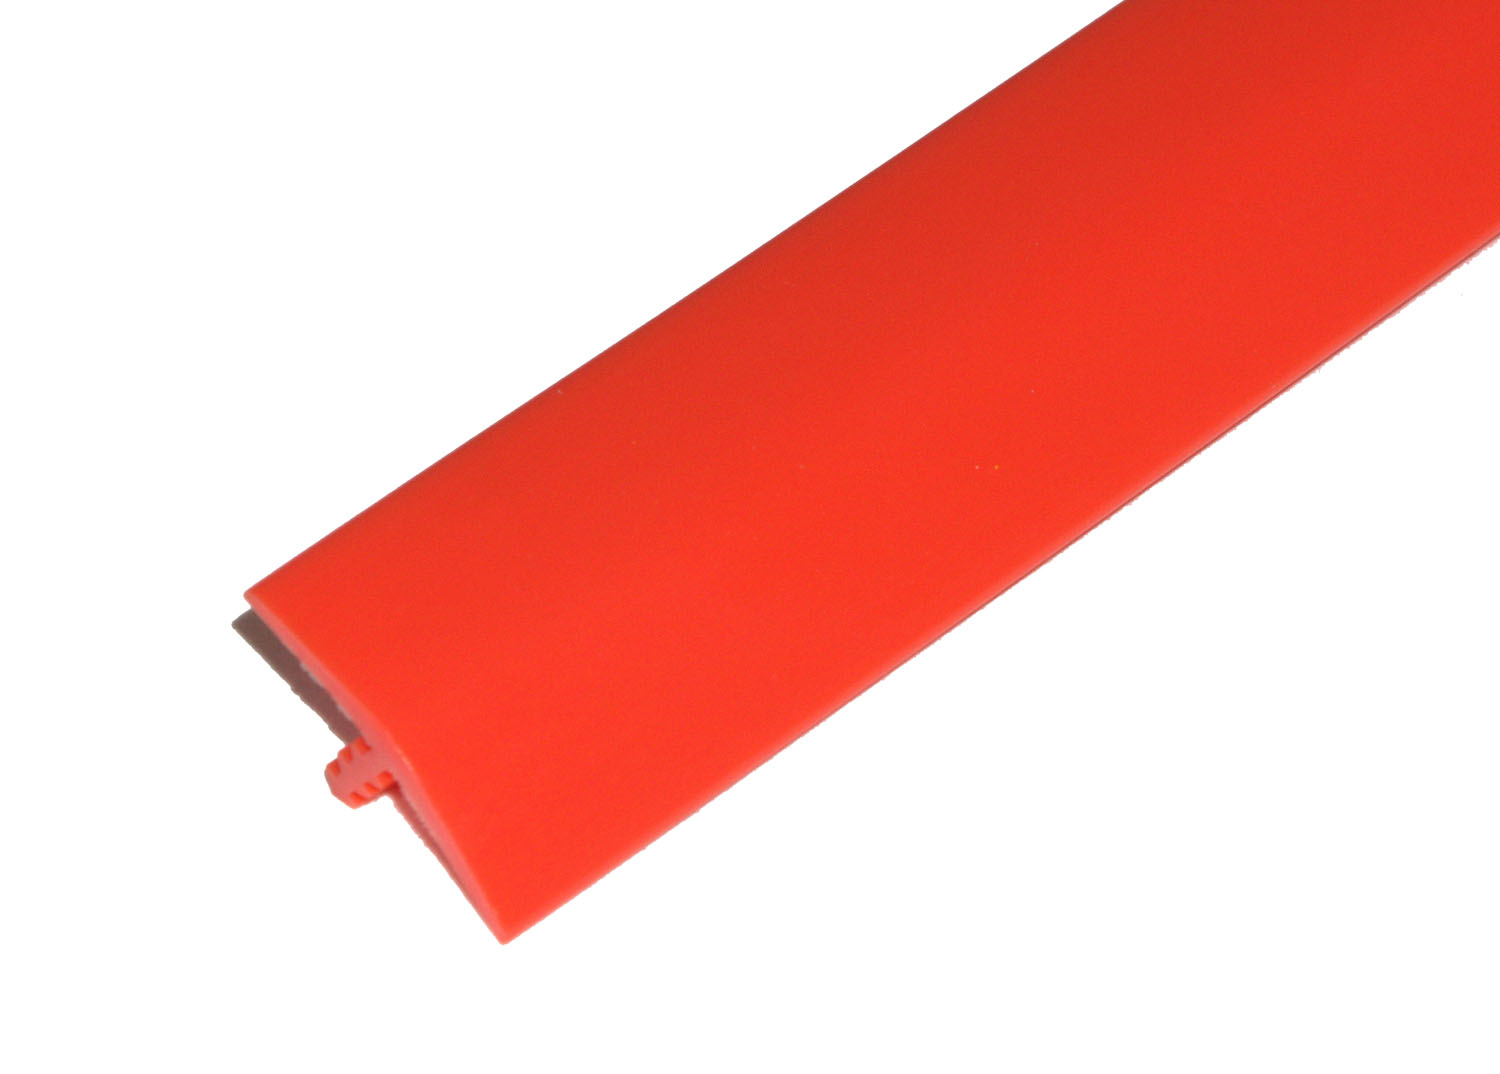 20ft of 3/4 Orange T-Molding for Pac Man Arcade Games or Mame Machines 